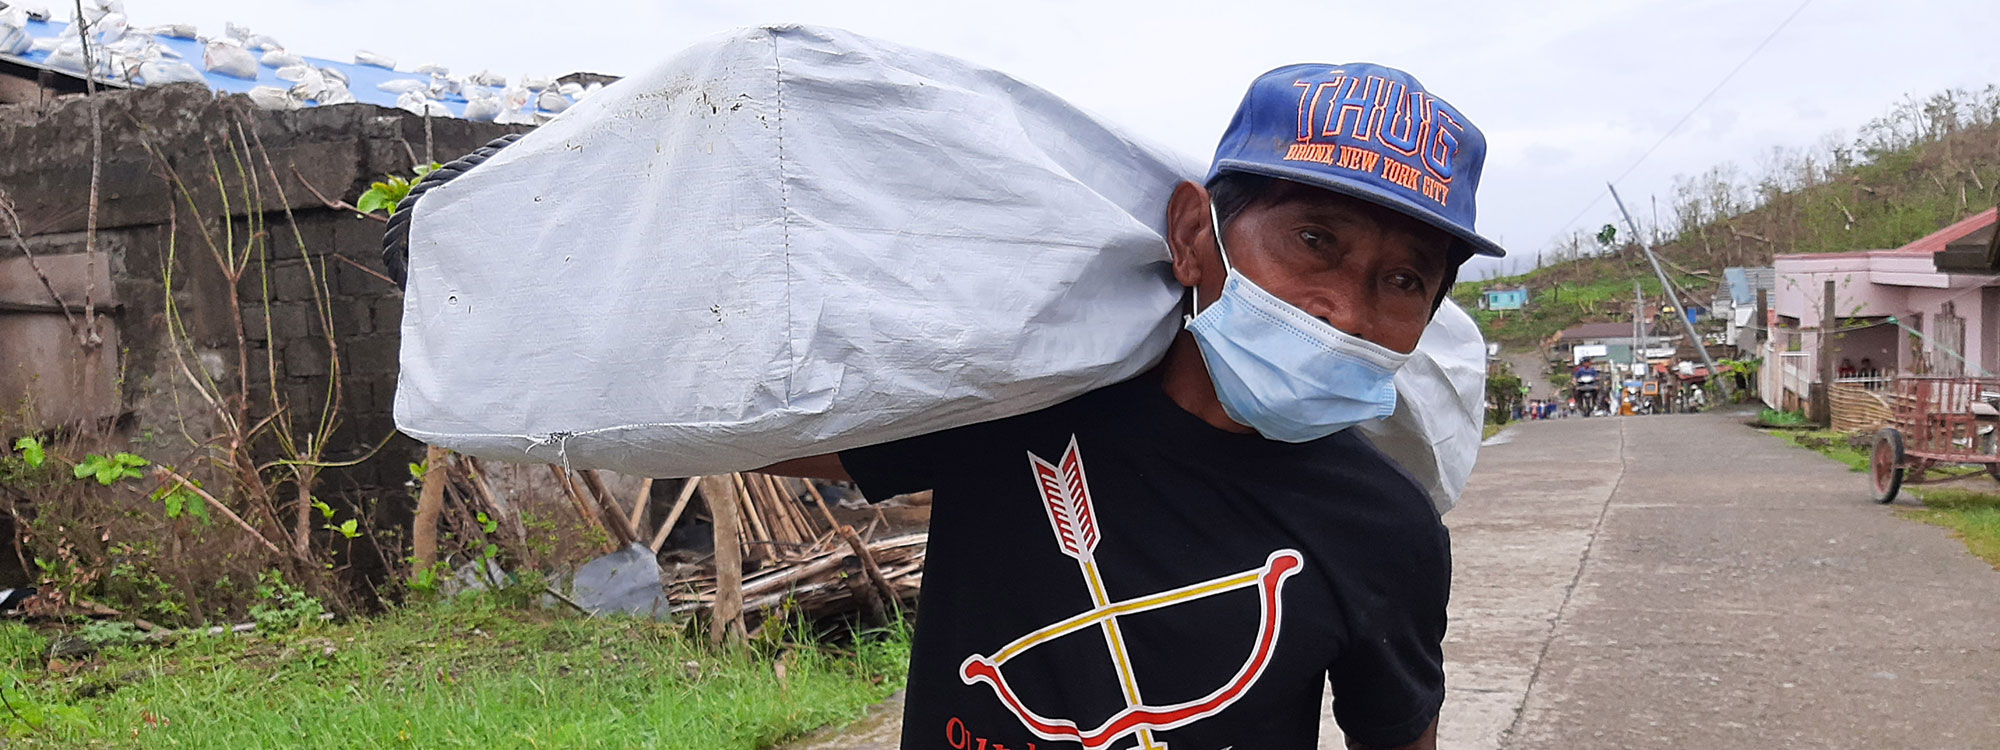 man carrying shelterbox aid in philippines